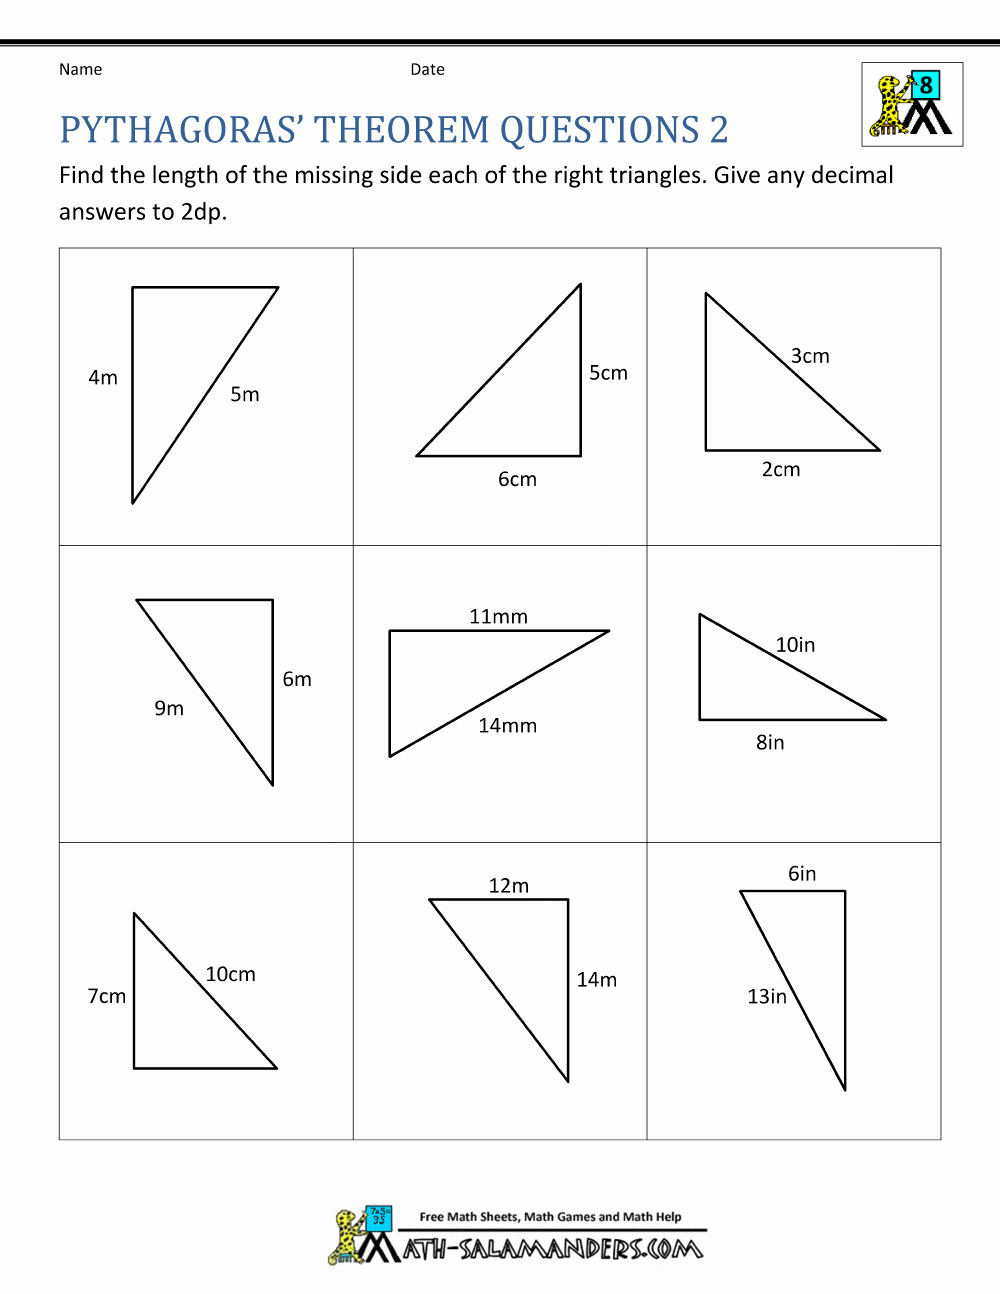 Pythagorean theorem Worksheet with Answers Lovely Pythagoras theorem Questions